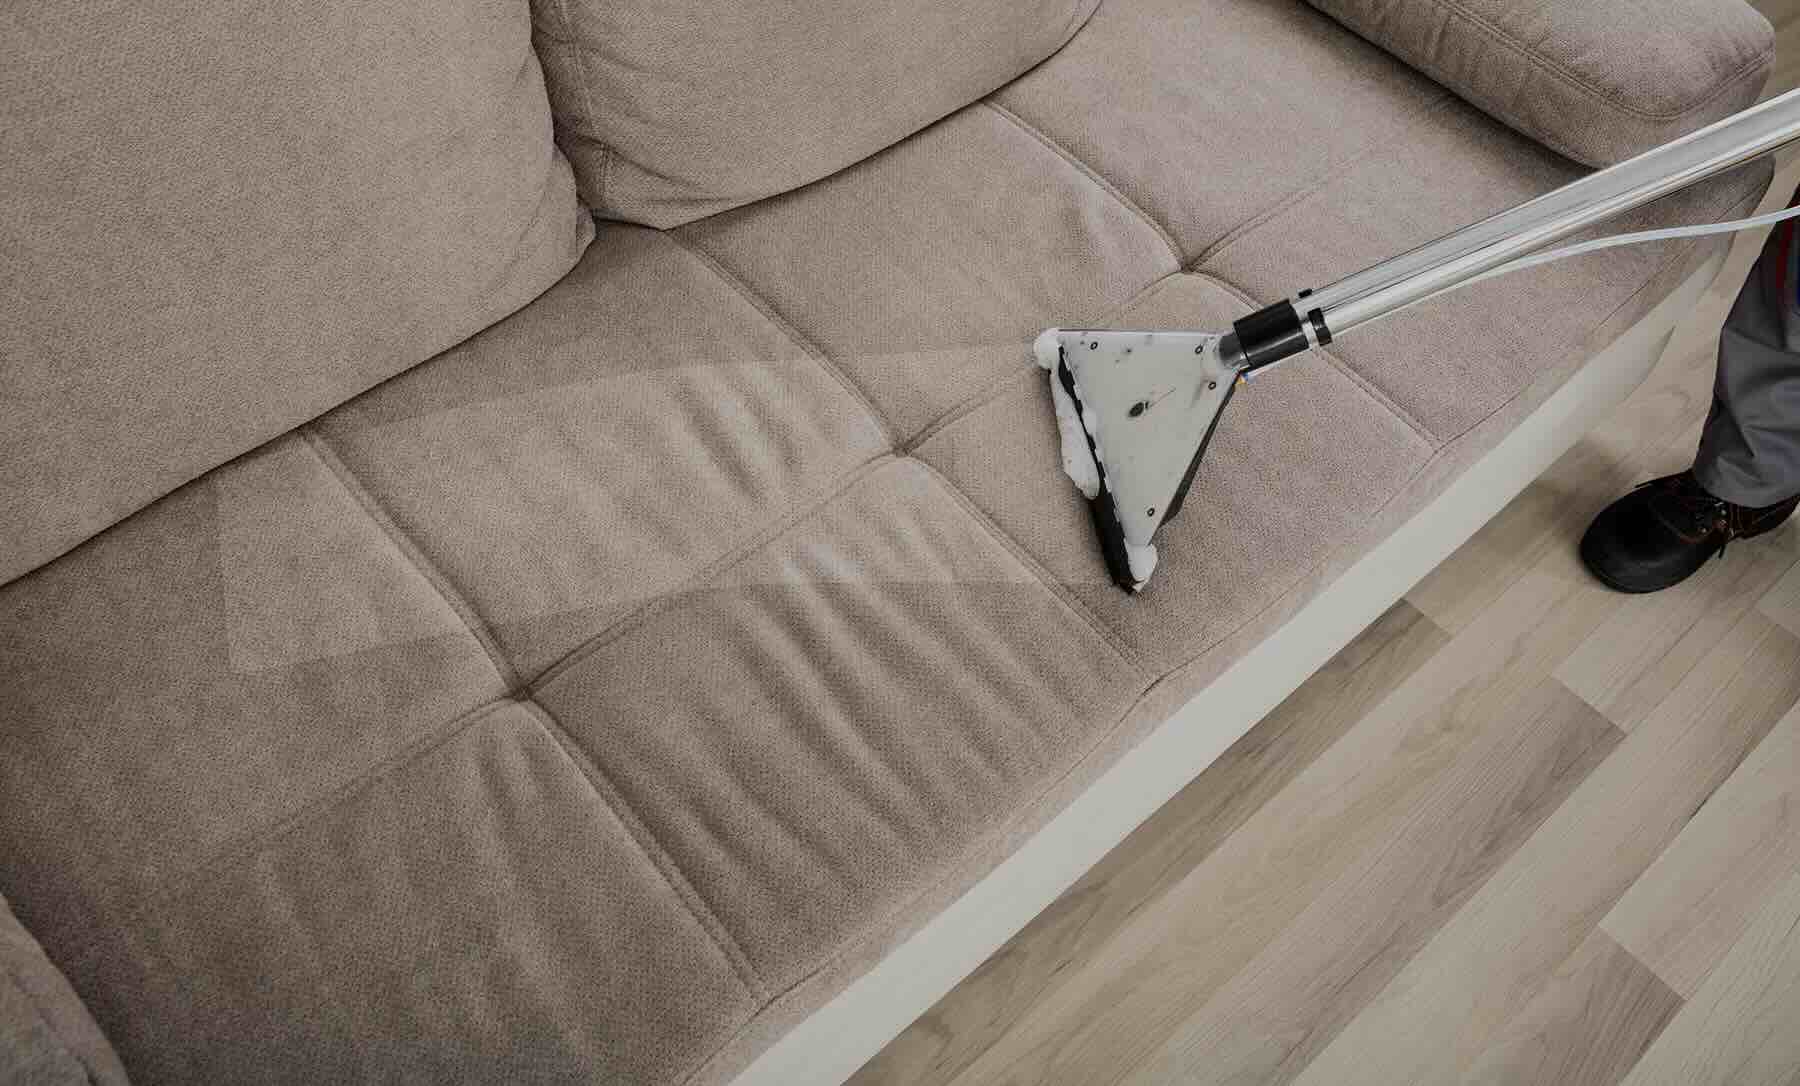 How To Steam Clean Couch Cushions